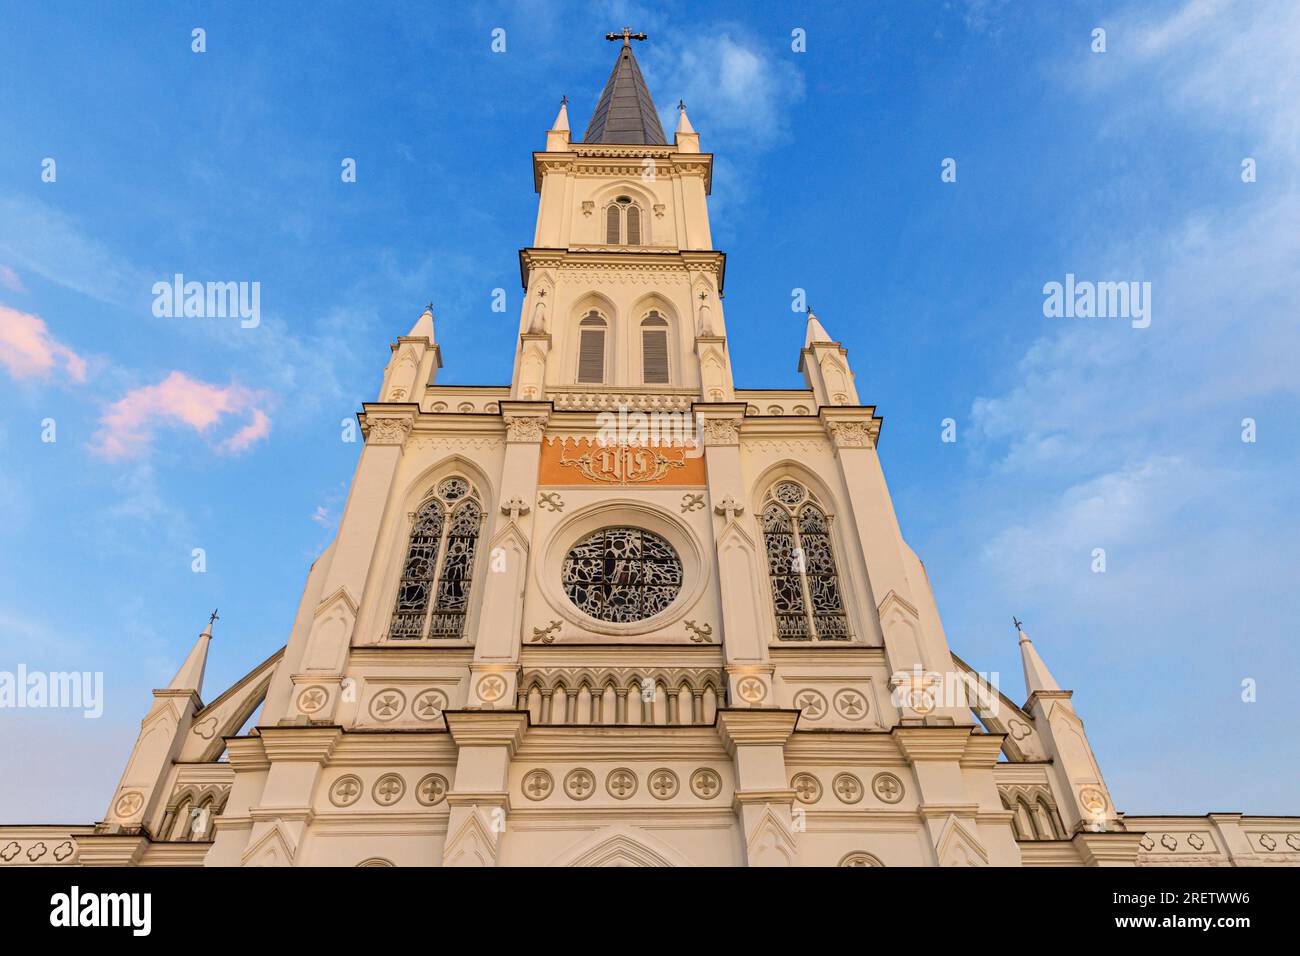 Steeple and spire of old Gothic style church, now CHIJMES Hall, CHIJMES complex, Singapore Stock Photo